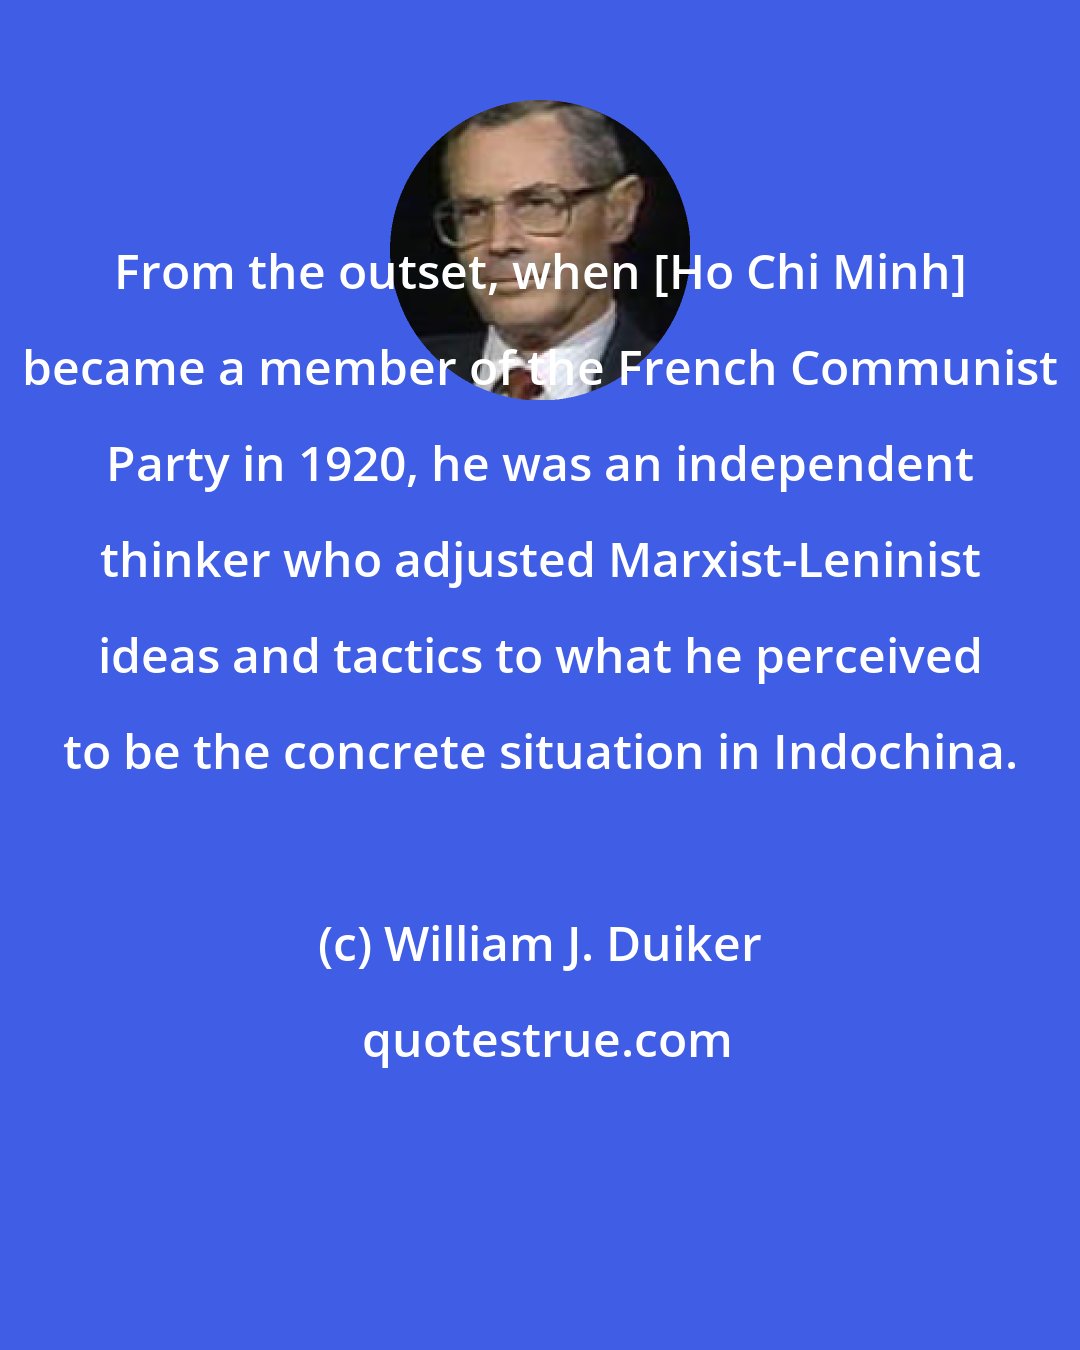 William J. Duiker: From the outset, when [Ho Chi Minh] became a member of the French Communist Party in 1920, he was an independent thinker who adjusted Marxist-Leninist ideas and tactics to what he perceived to be the concrete situation in Indochina.